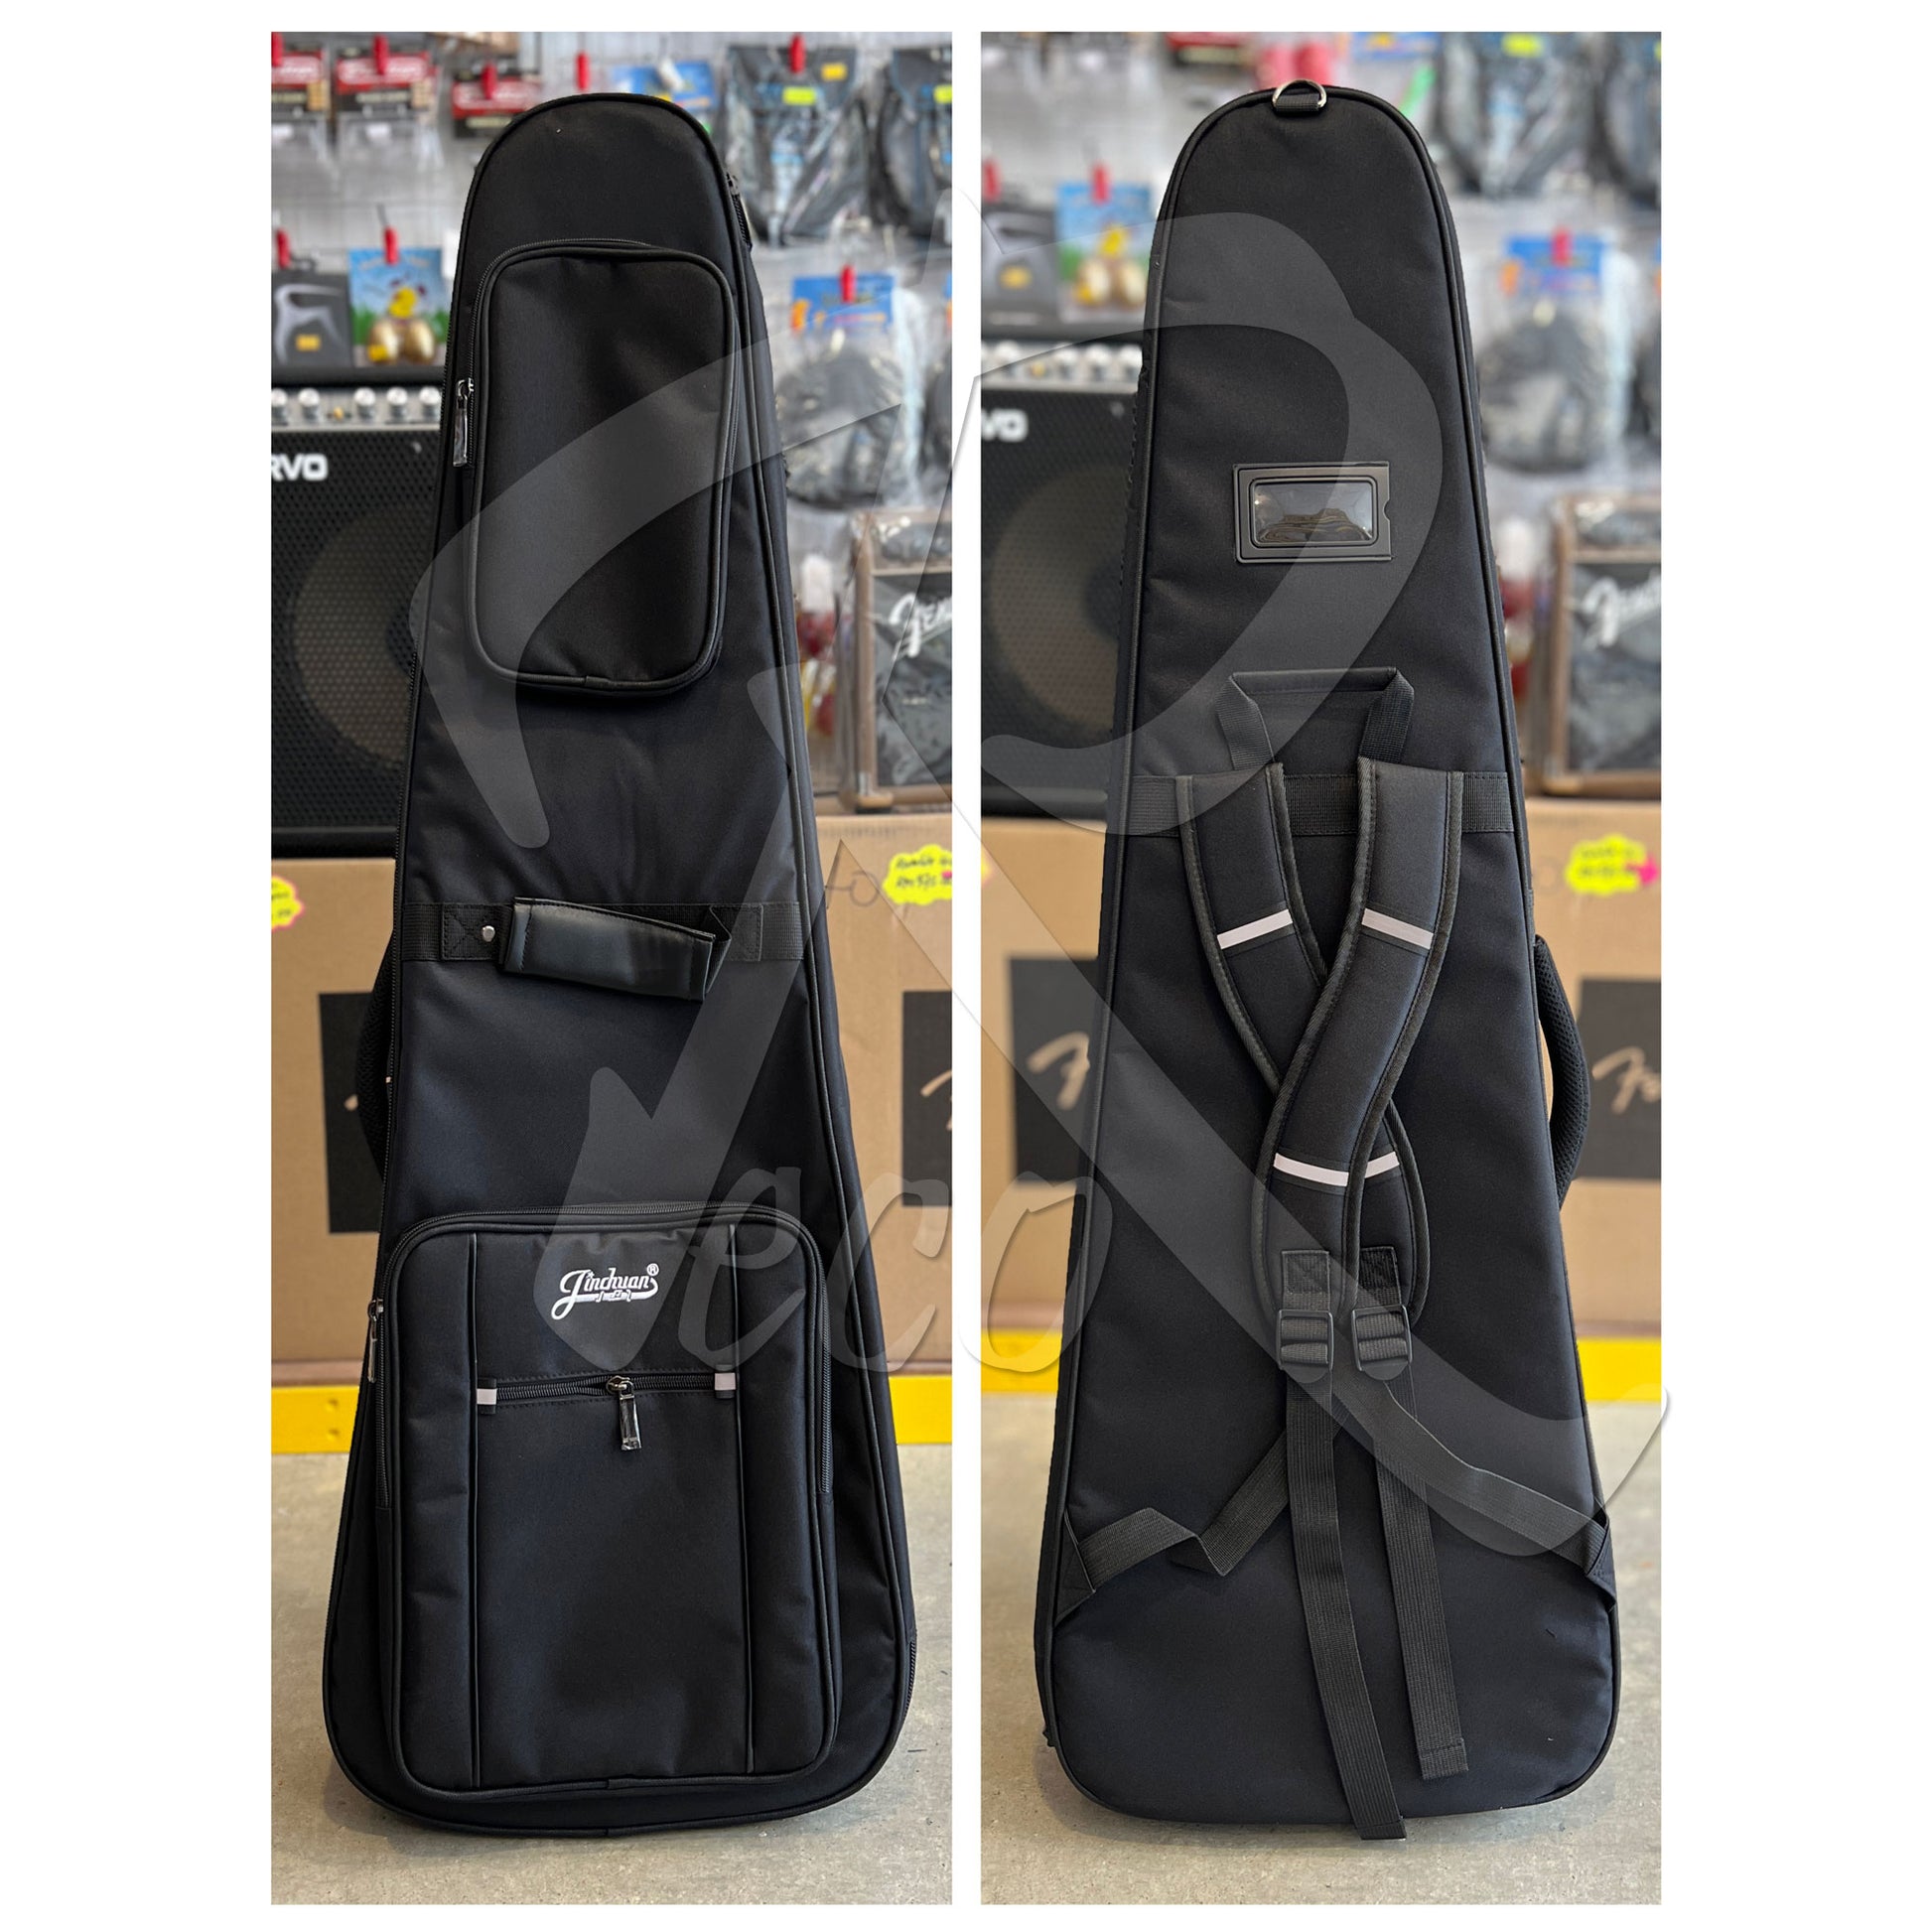 RM REB300-JC-B2213 20mm Thick Padded Electric Guitar Bag with Neck Rest Double Shoulder Strap, Black - Reco Music Malaysia